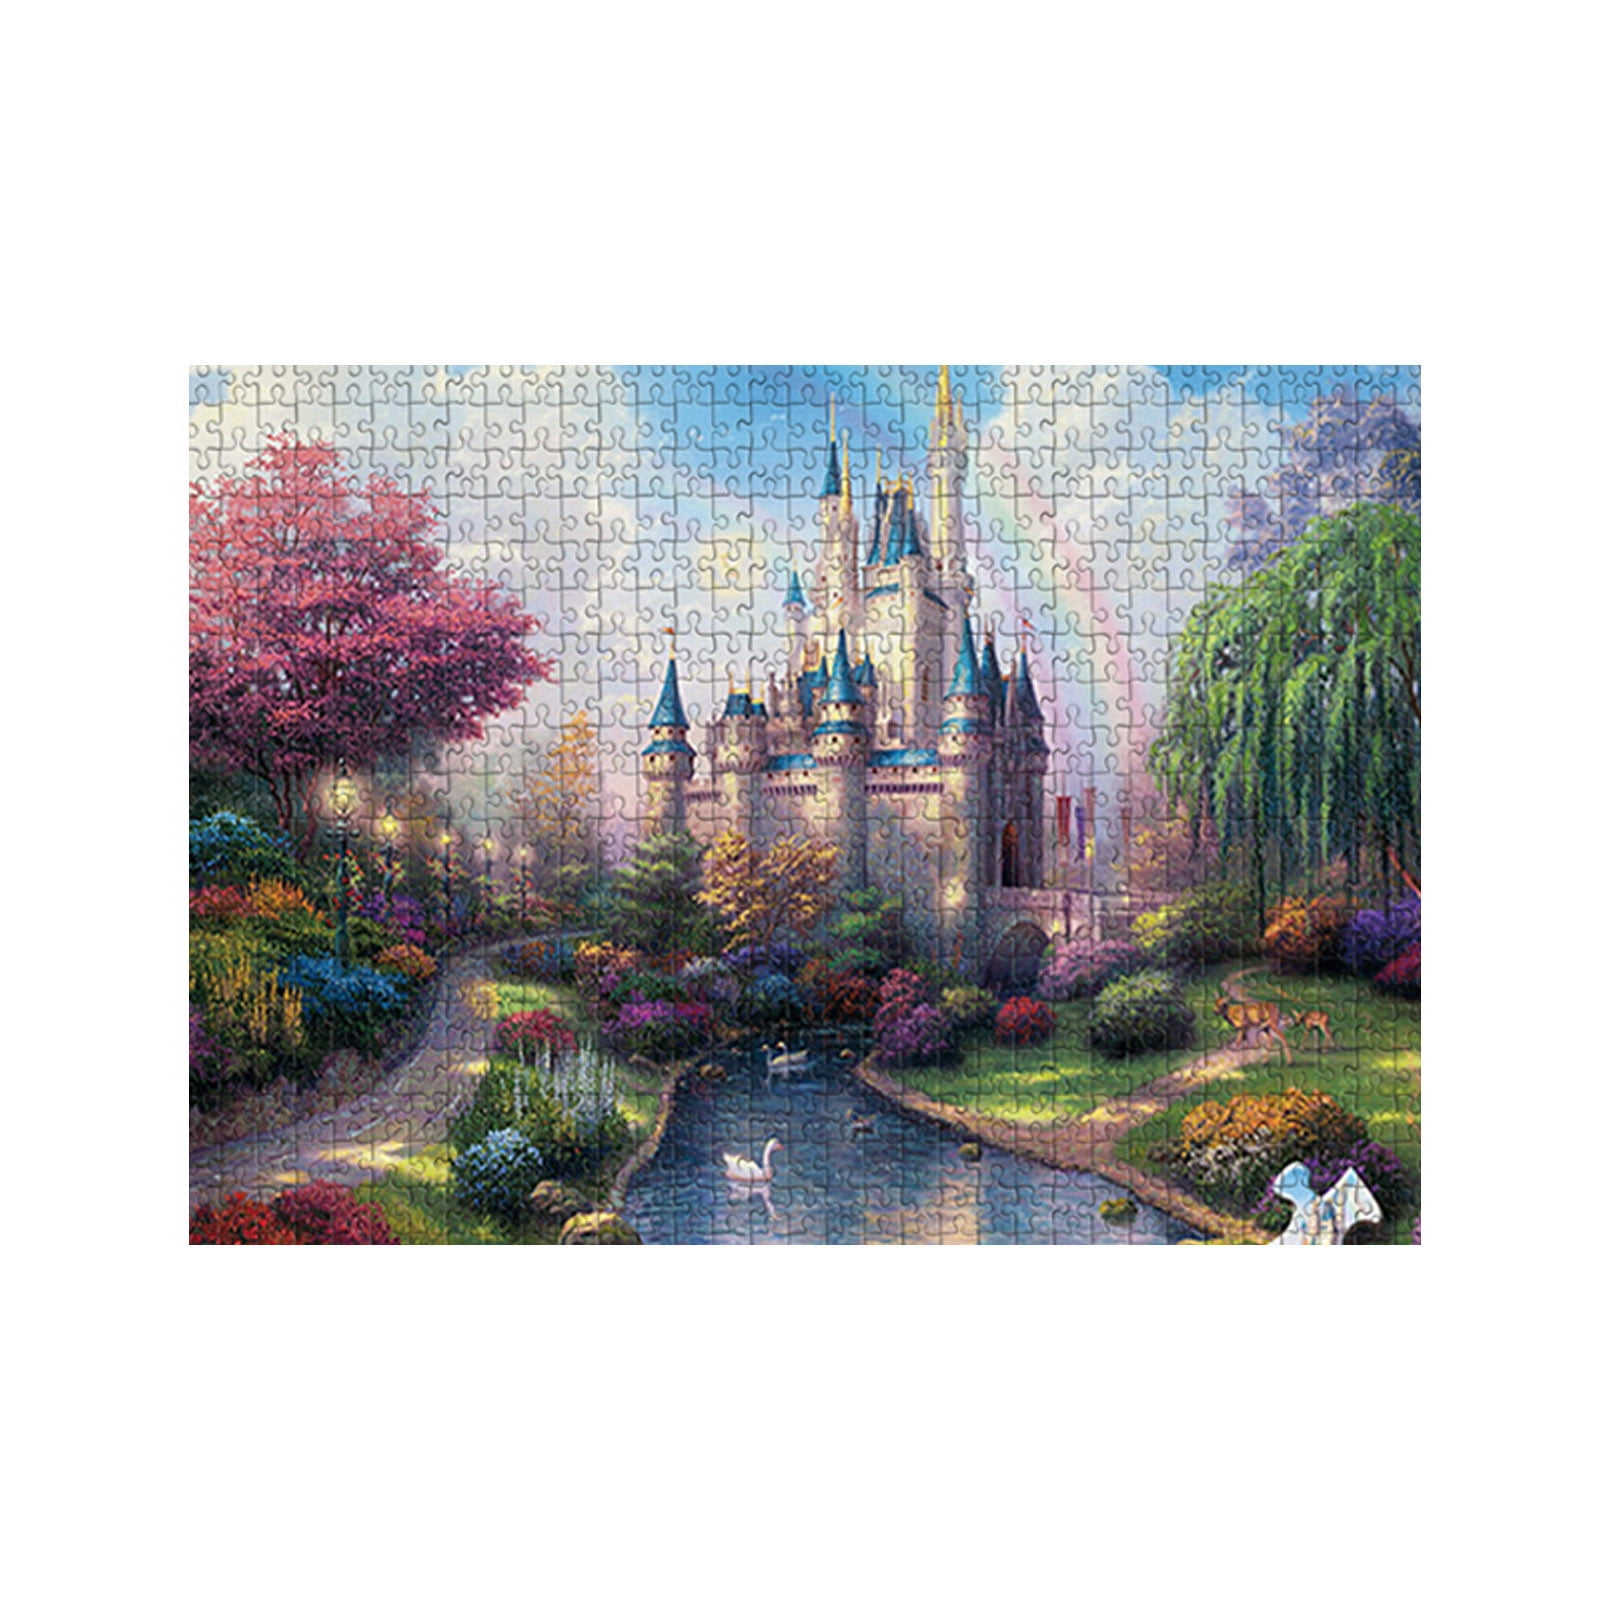 1000 Pieces Dream castle Jigsaw Puzzles Adults Girls Rainbow Castle Gifts Toys 